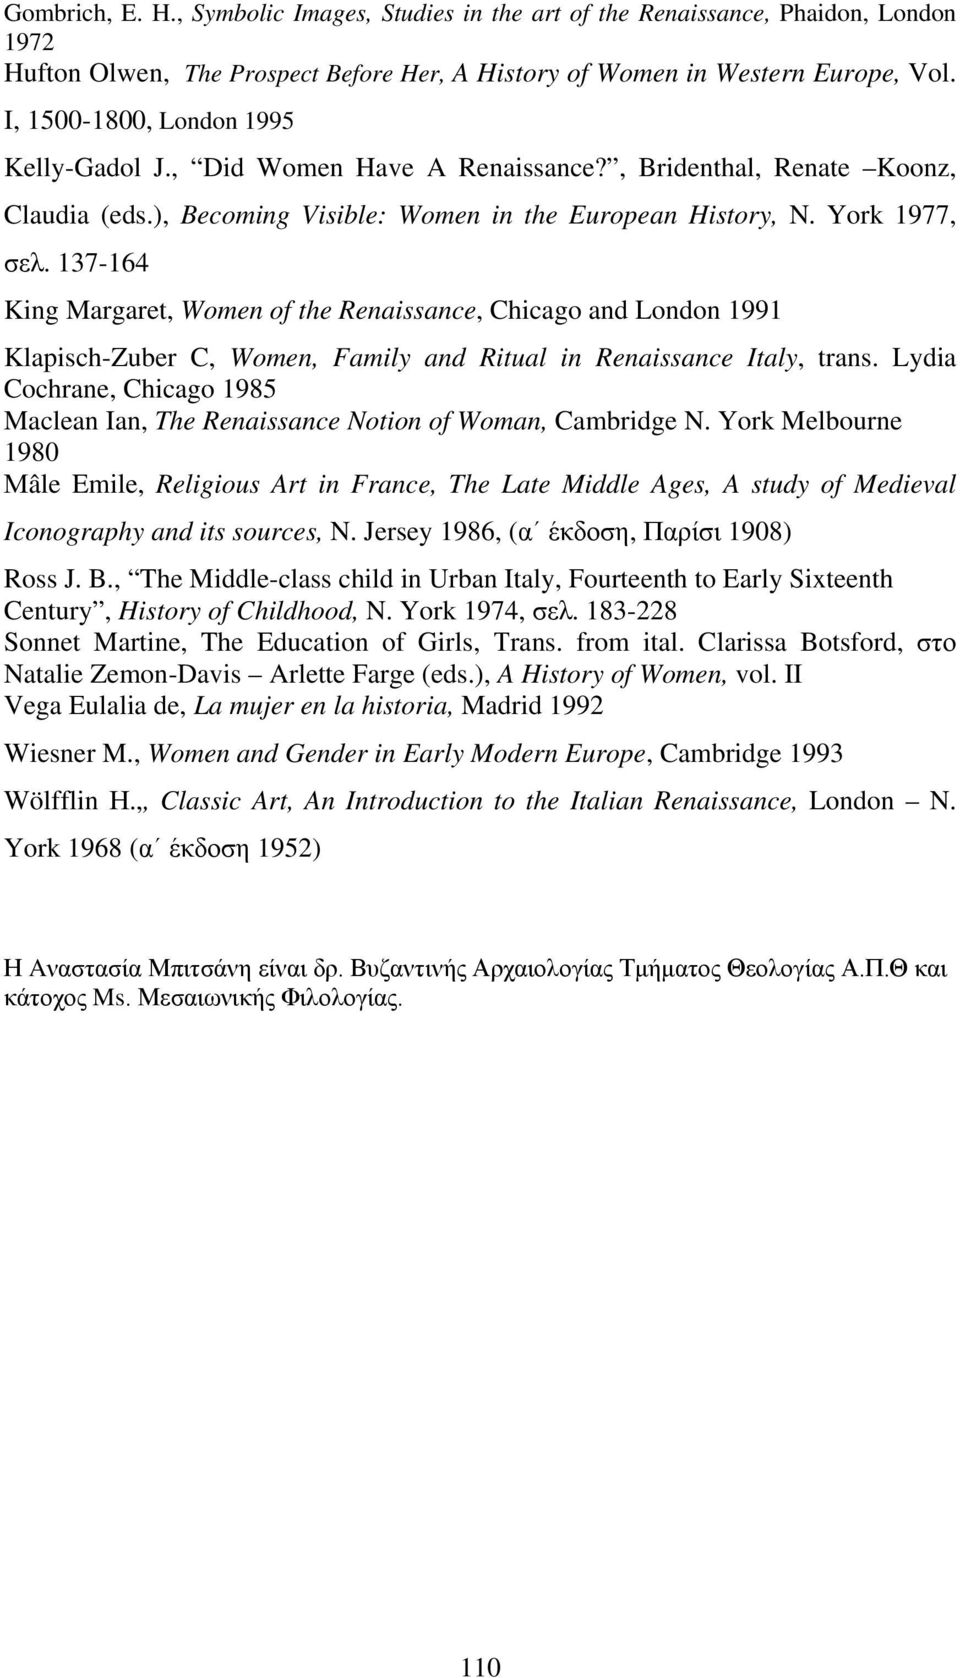 137-164 King Margaret, Women of the Renaissance, Chicago and London 1991 Klapisch-Zuber C, Women, Family and Ritual in Renaissance Italy, trans.